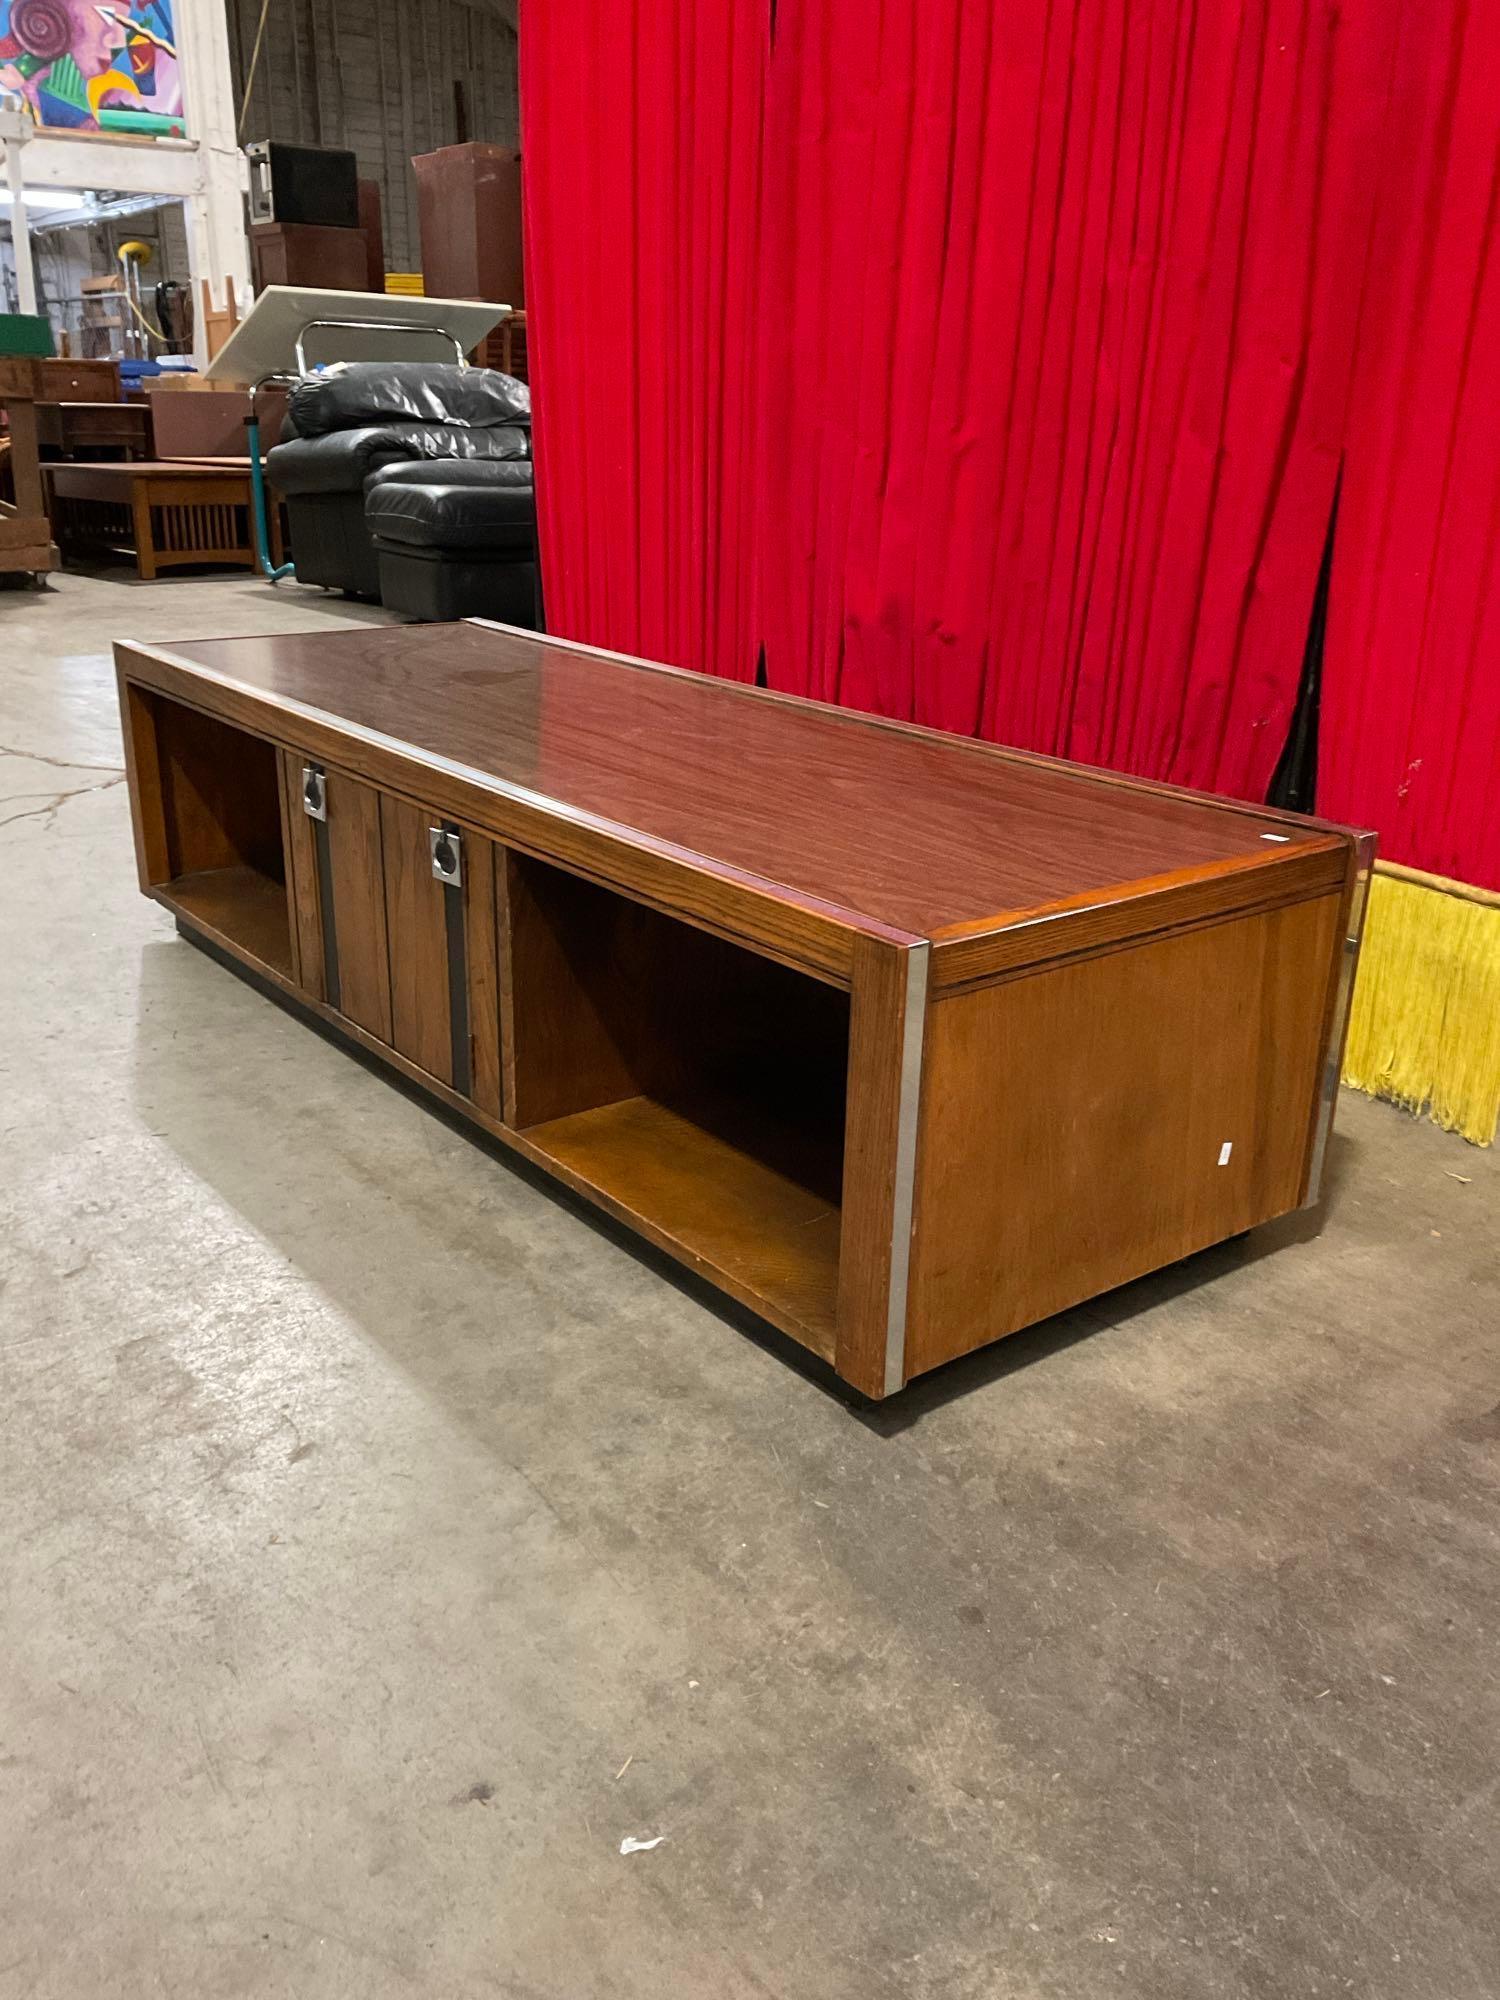 Vintage Mid-Century Modern Wooden Console w/ Inlaid Mirror Details, Cupboard & 2 Shelves. See pics.